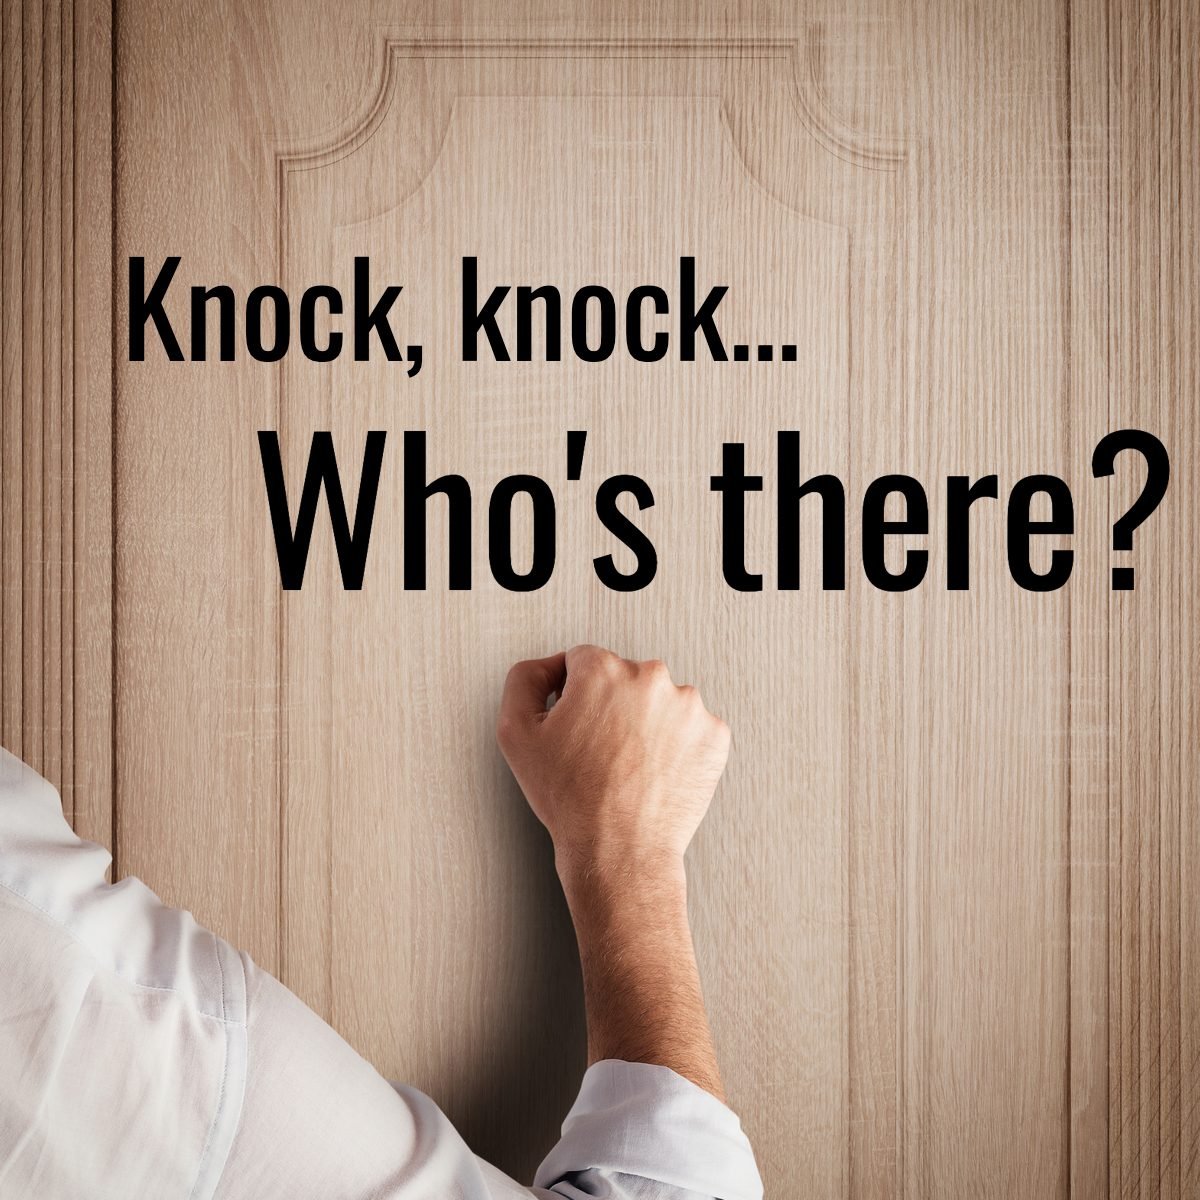 Knock Knock Jokes That Make Us Laugh Every Time | Reader's Digest